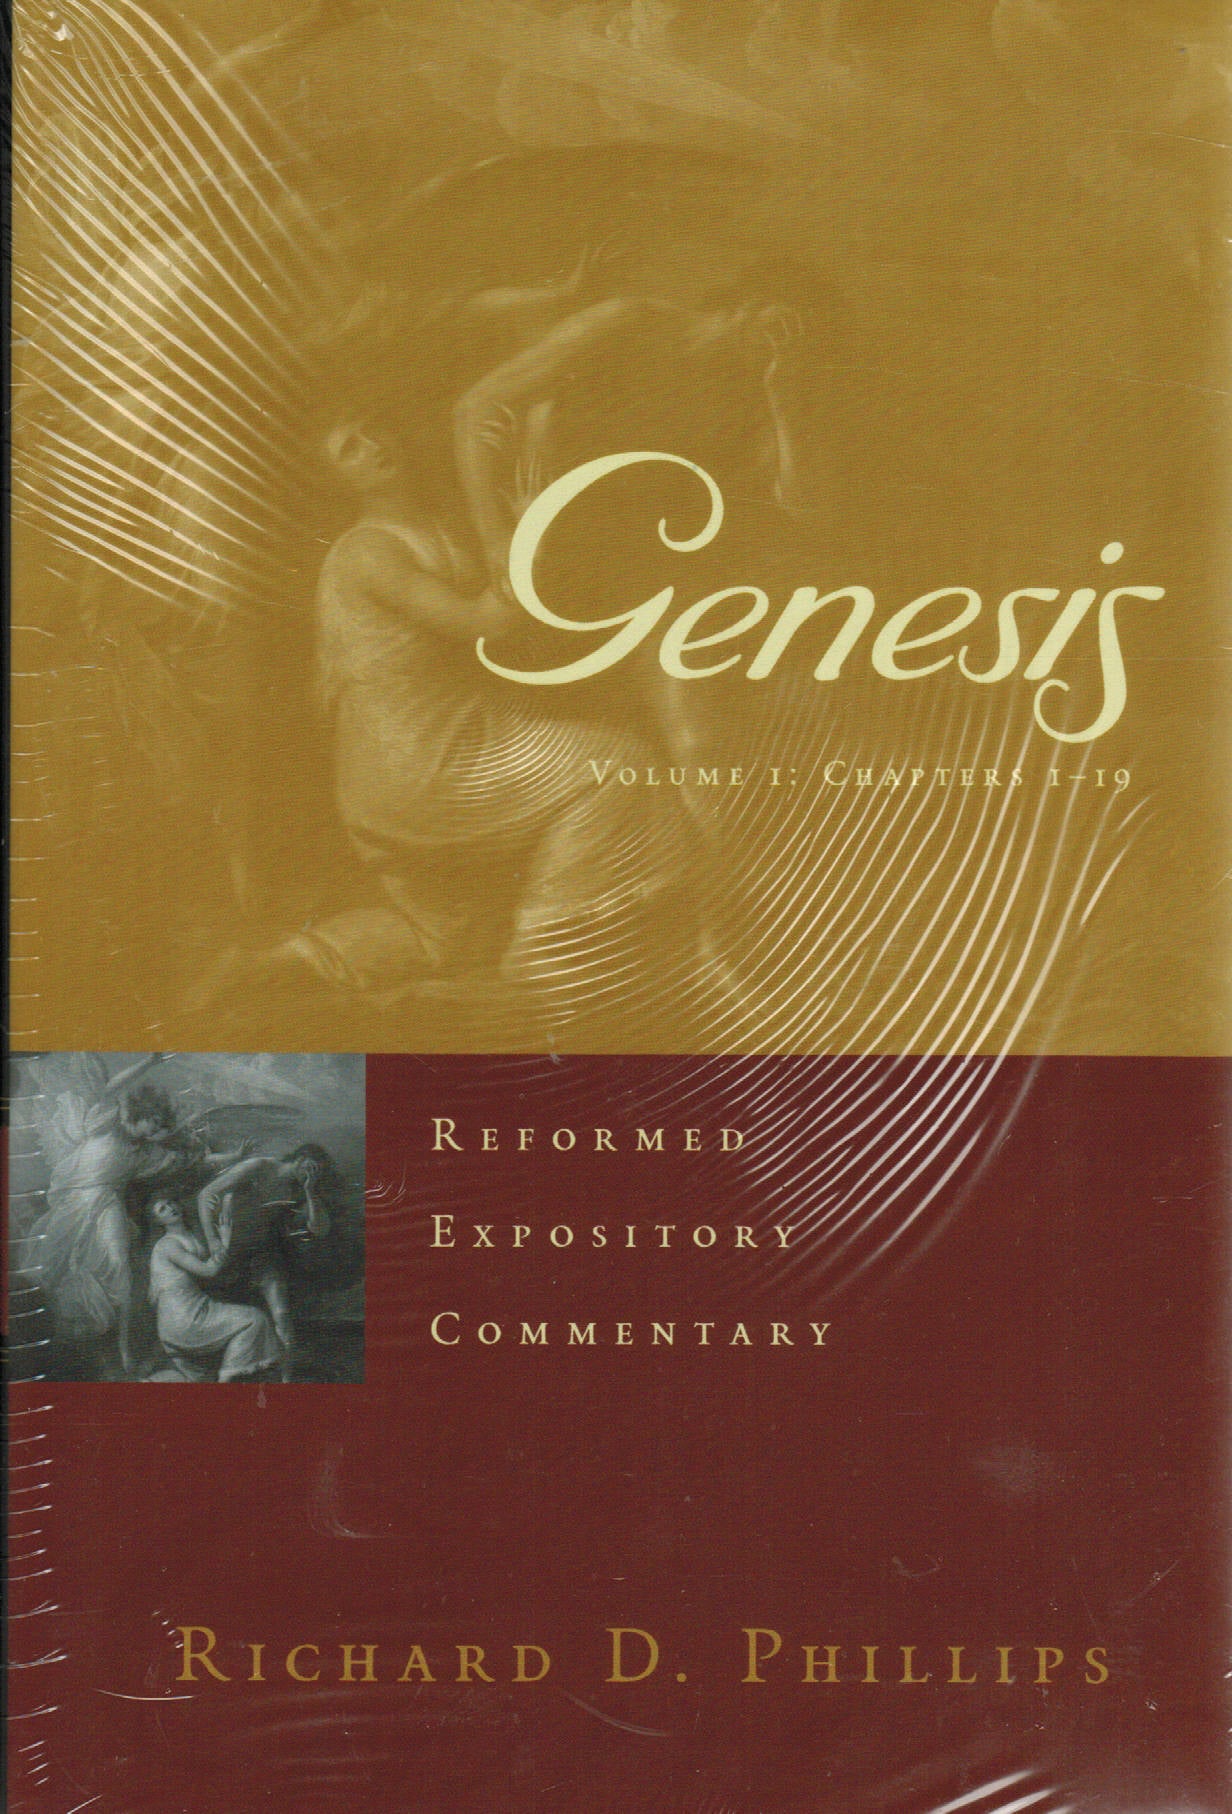 Reformed Expository Commentary - Genesis 2 Volume Set